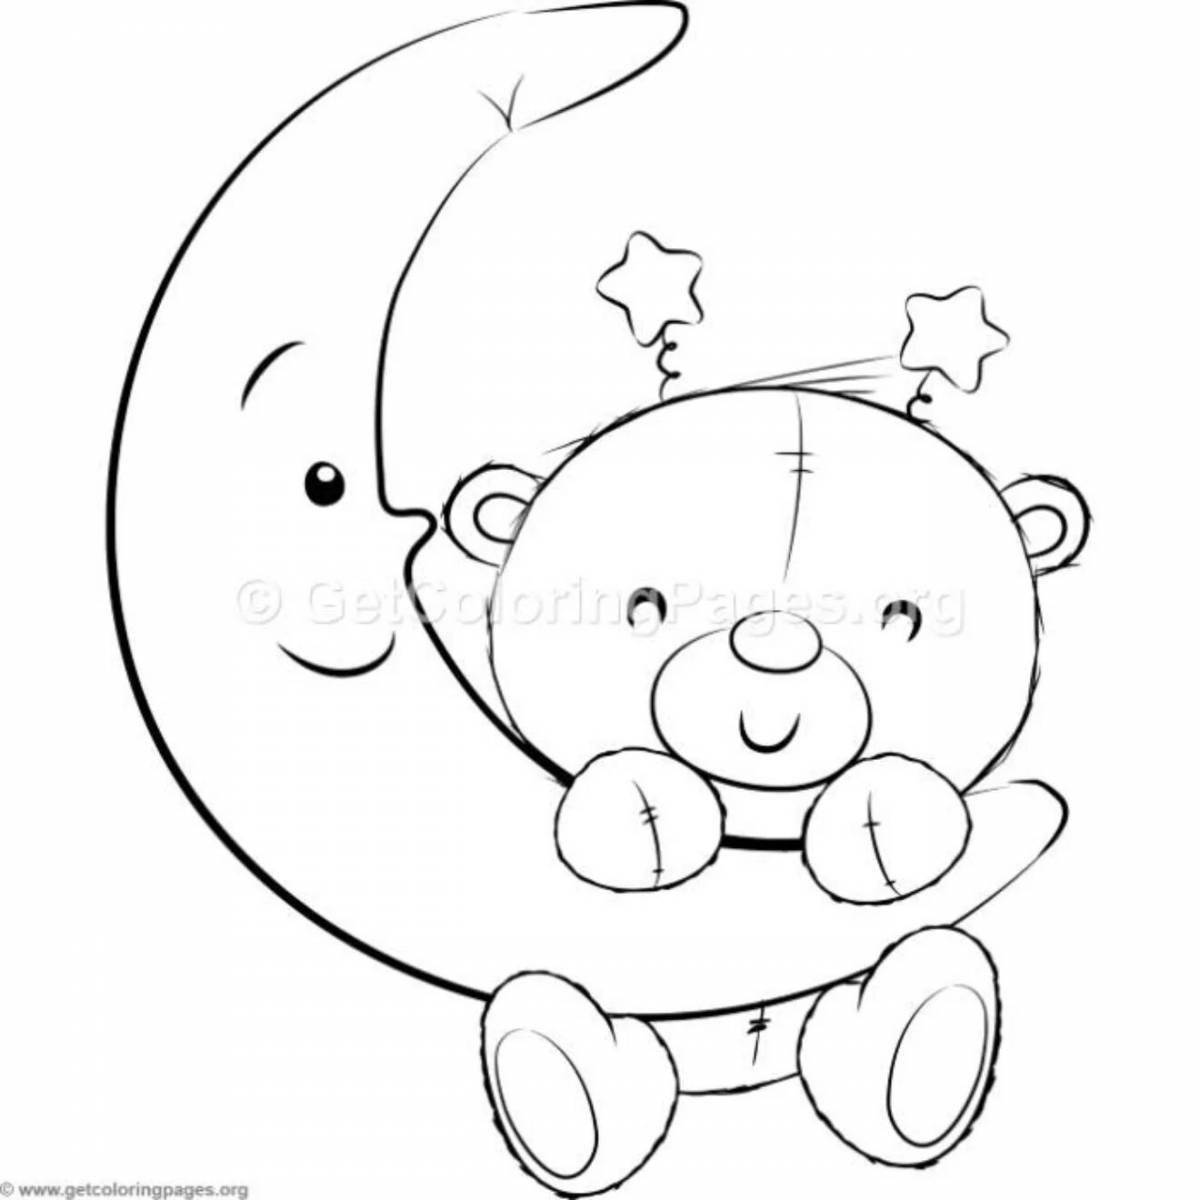 Coloring page magic bear on the moon